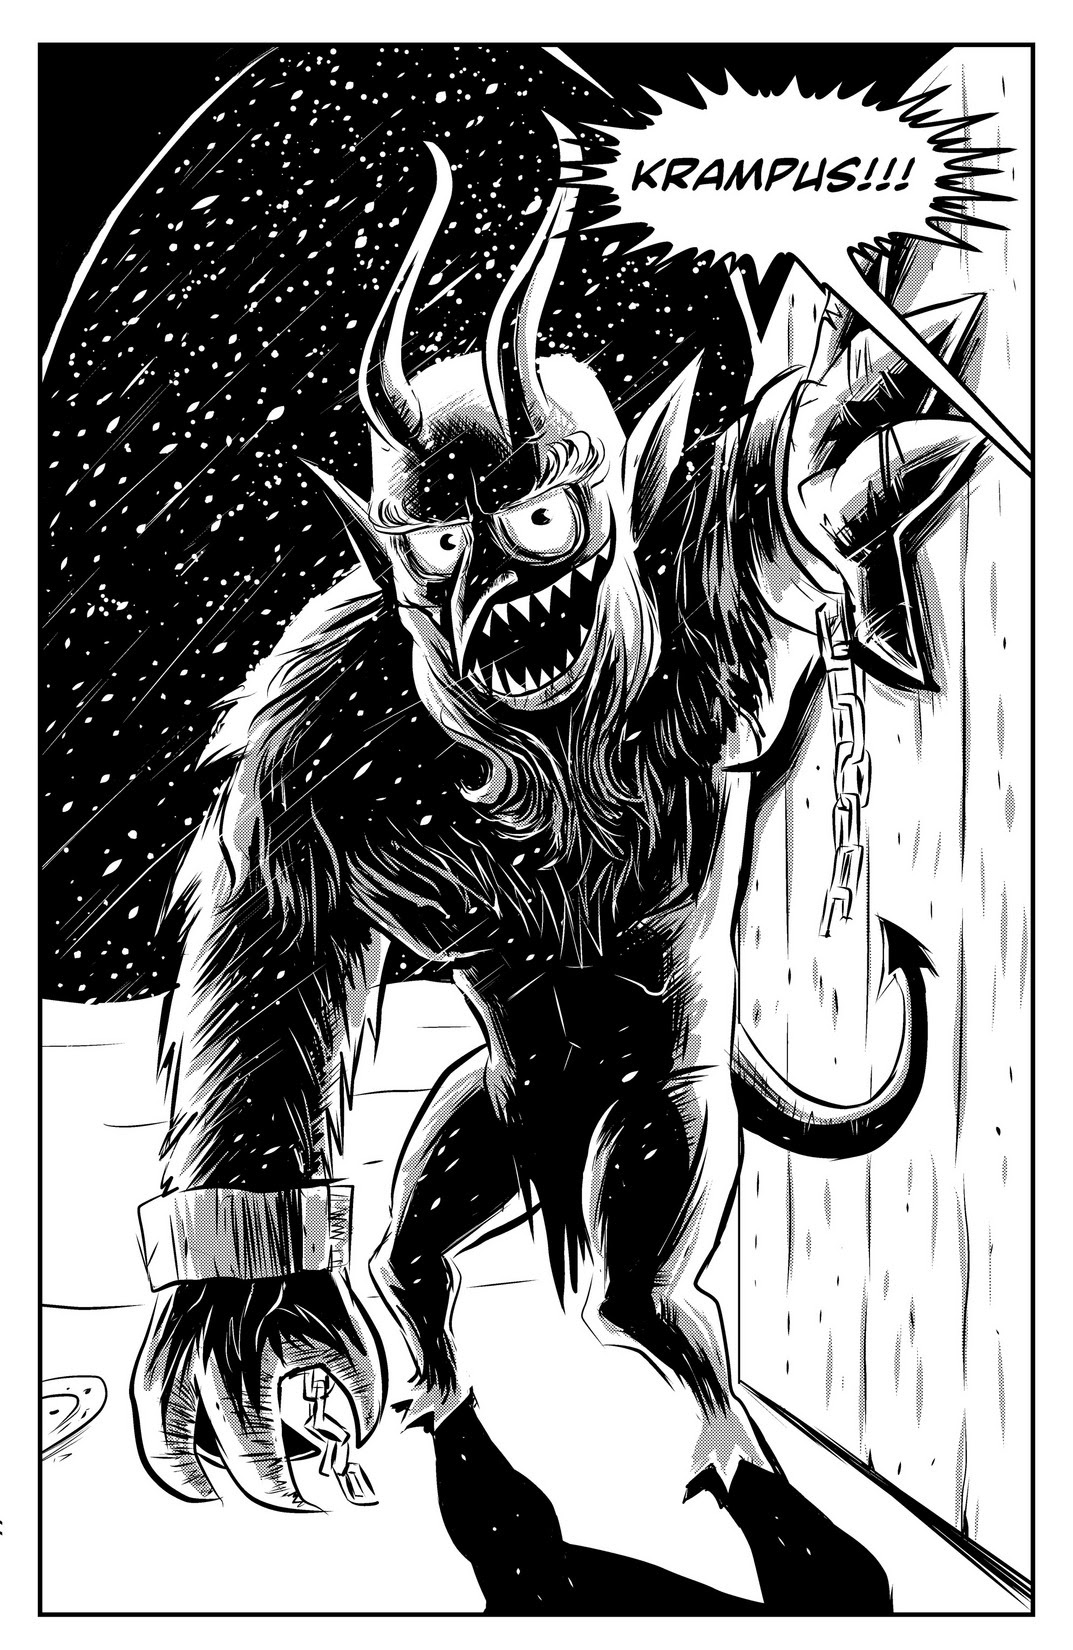 Read online 'Twas the Night Before Krampus comic -  Issue # Full - 21